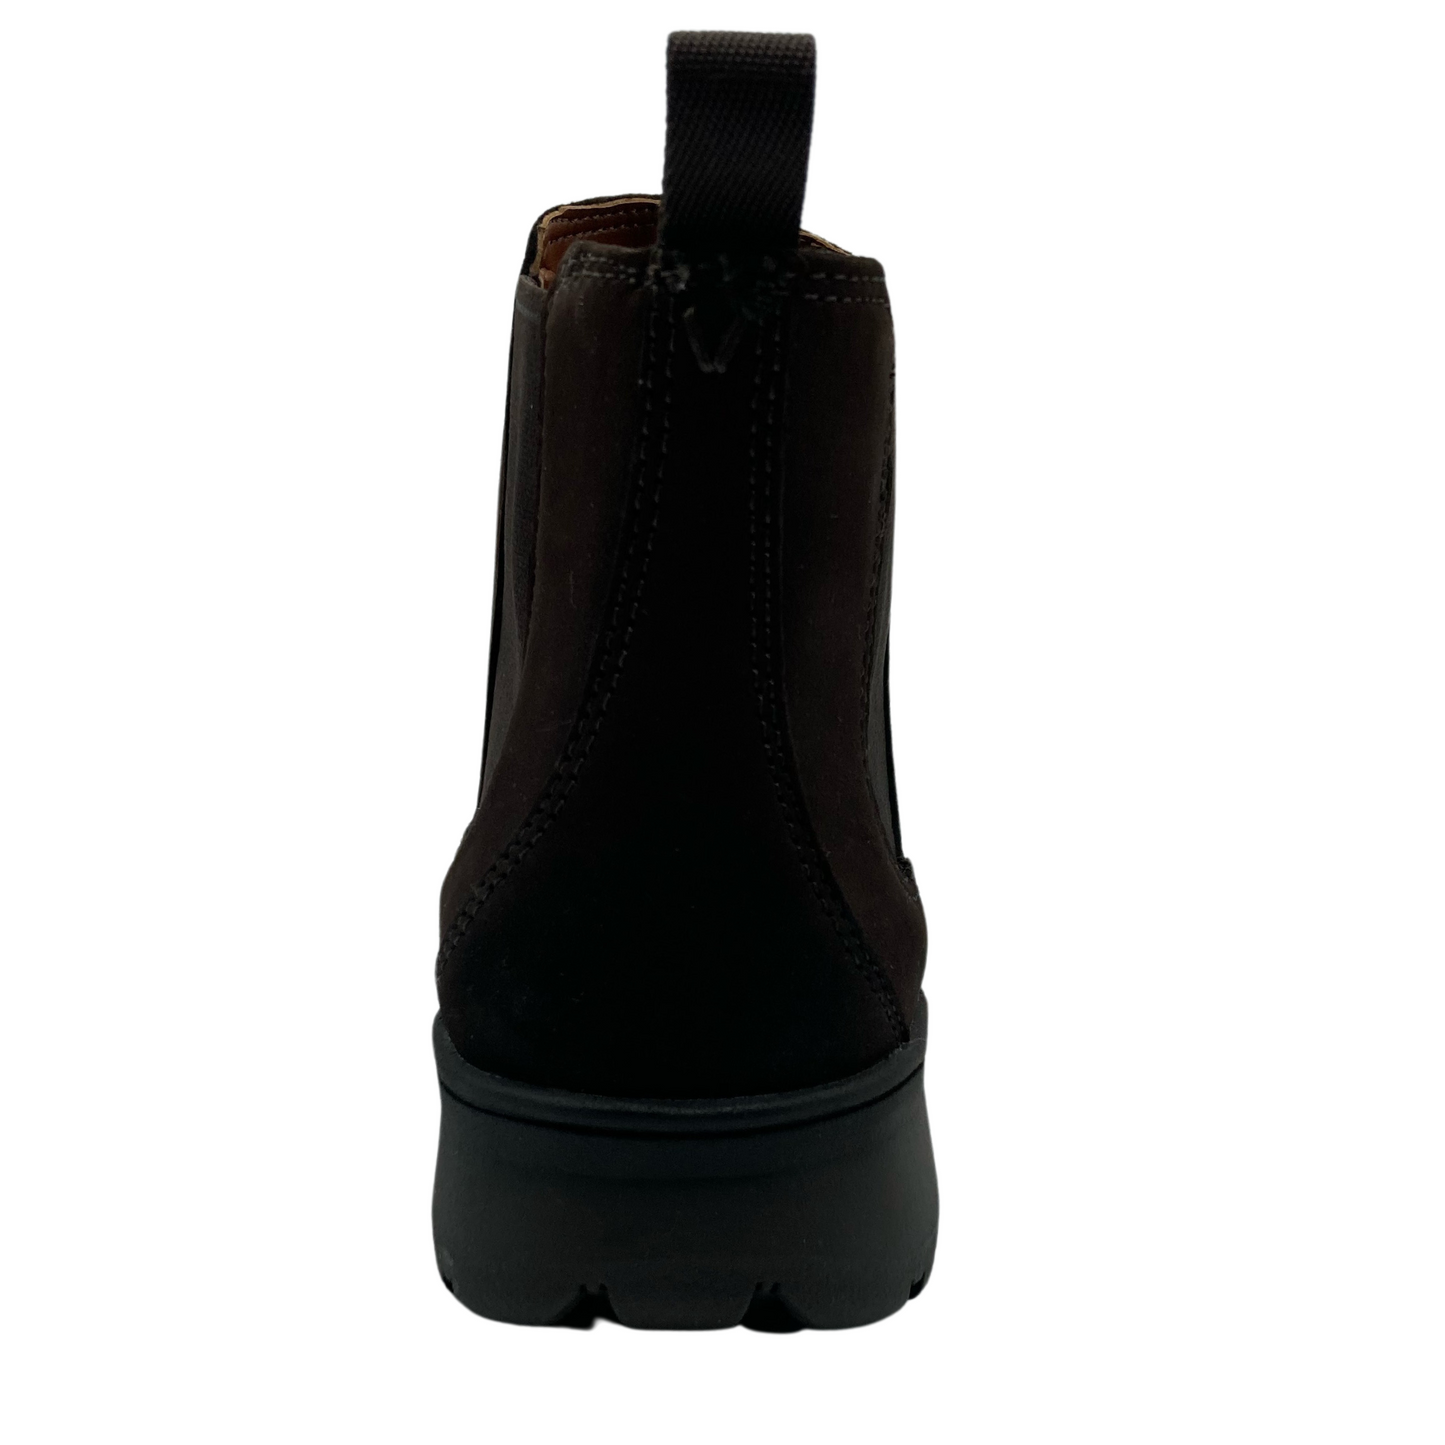 View of the back of a nubuck bootie with pull-on tab and black rubber sole